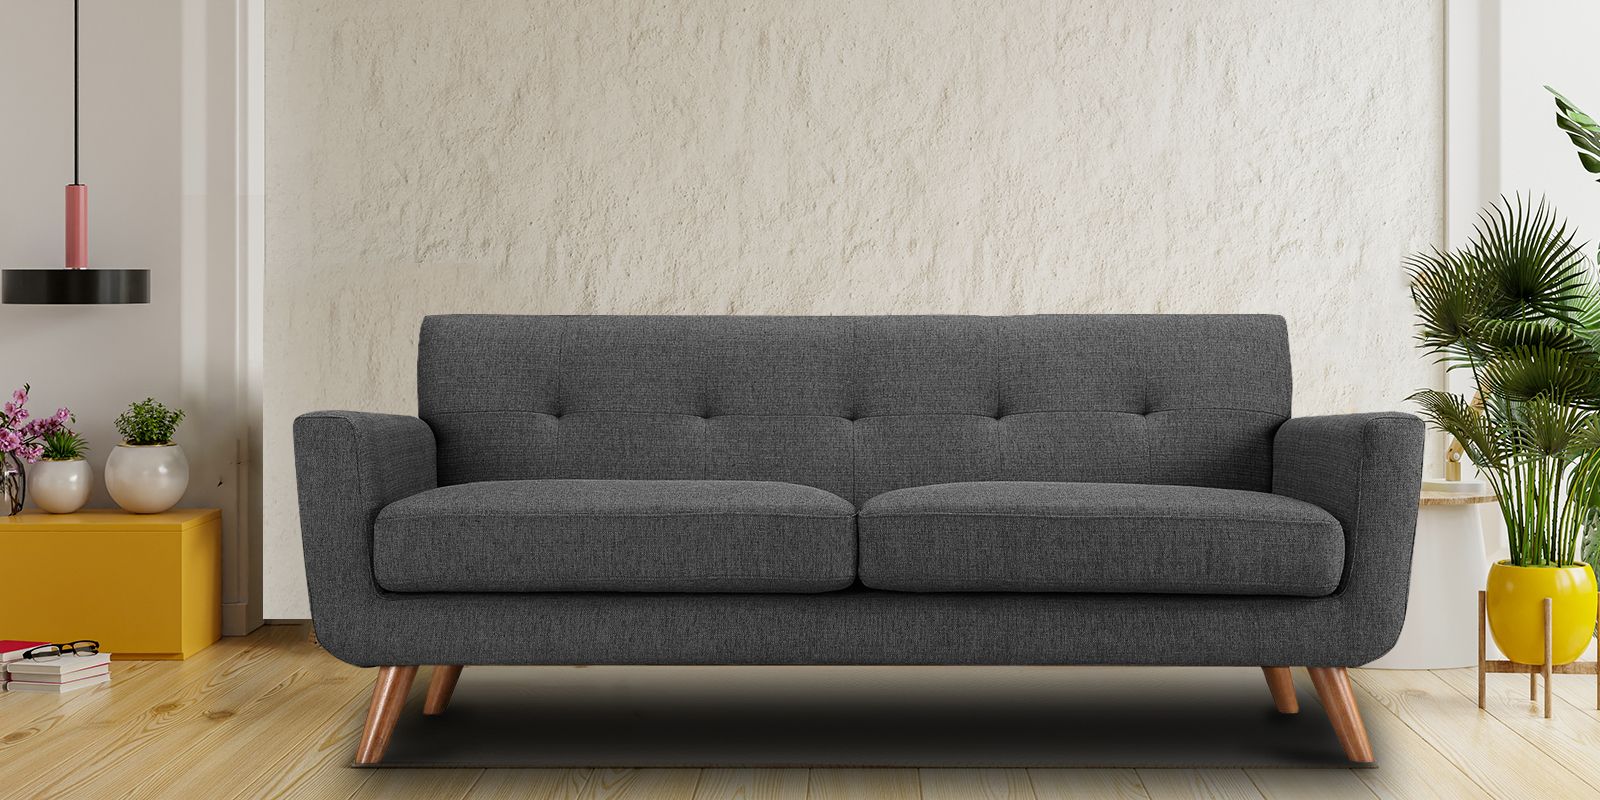 Mid Century Classic 3 Seater Sofa In Grey Colour – Dreamzz Furniture Regarding Mid Century 3 Seat Couches (View 3 of 20)